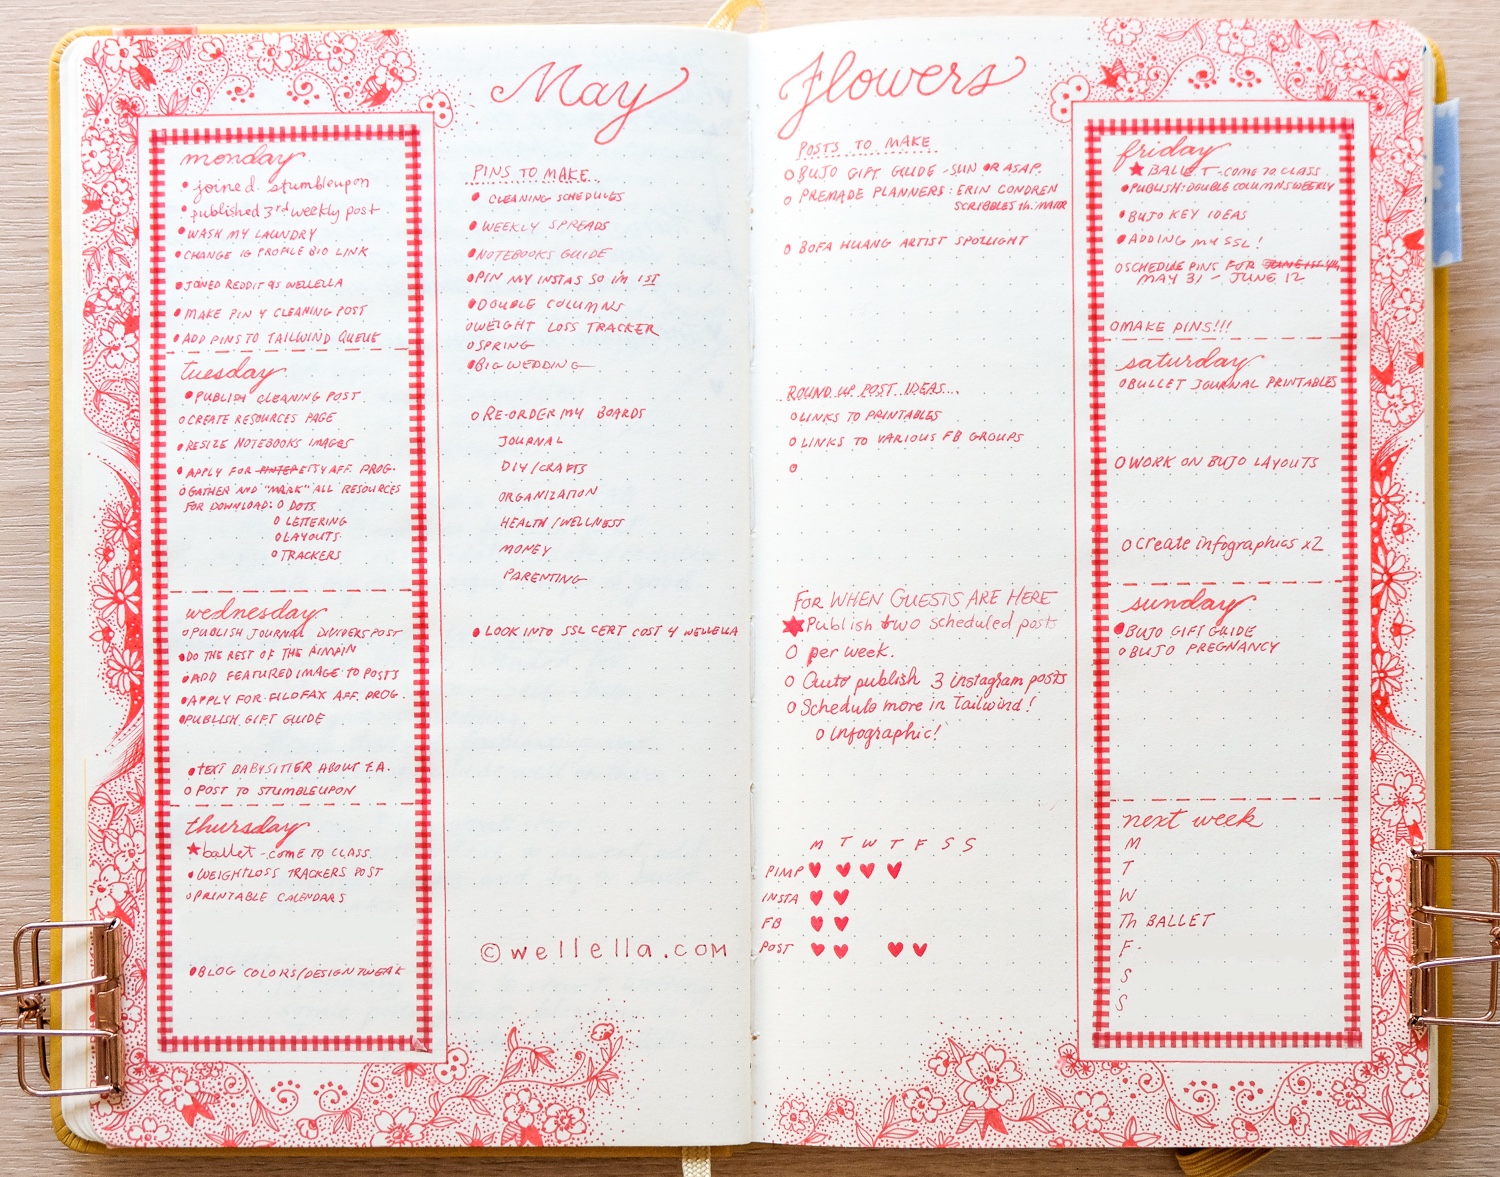 bullet journal weekly spread ideas floral theme
